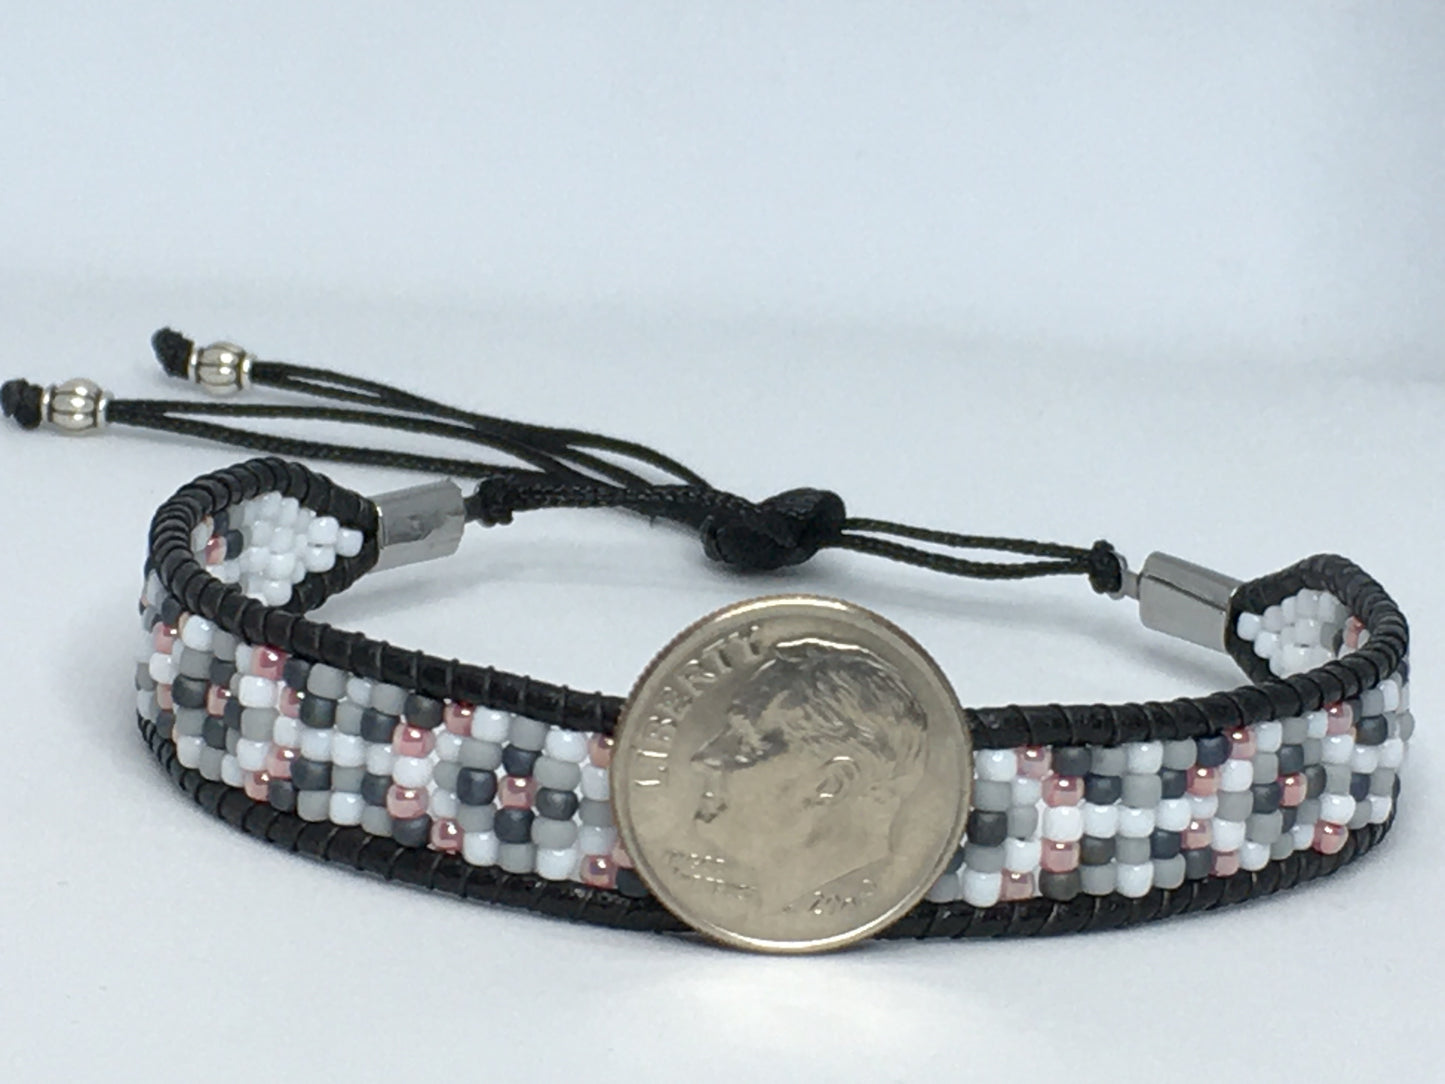 7" Bead and Leather Women's Bracelet